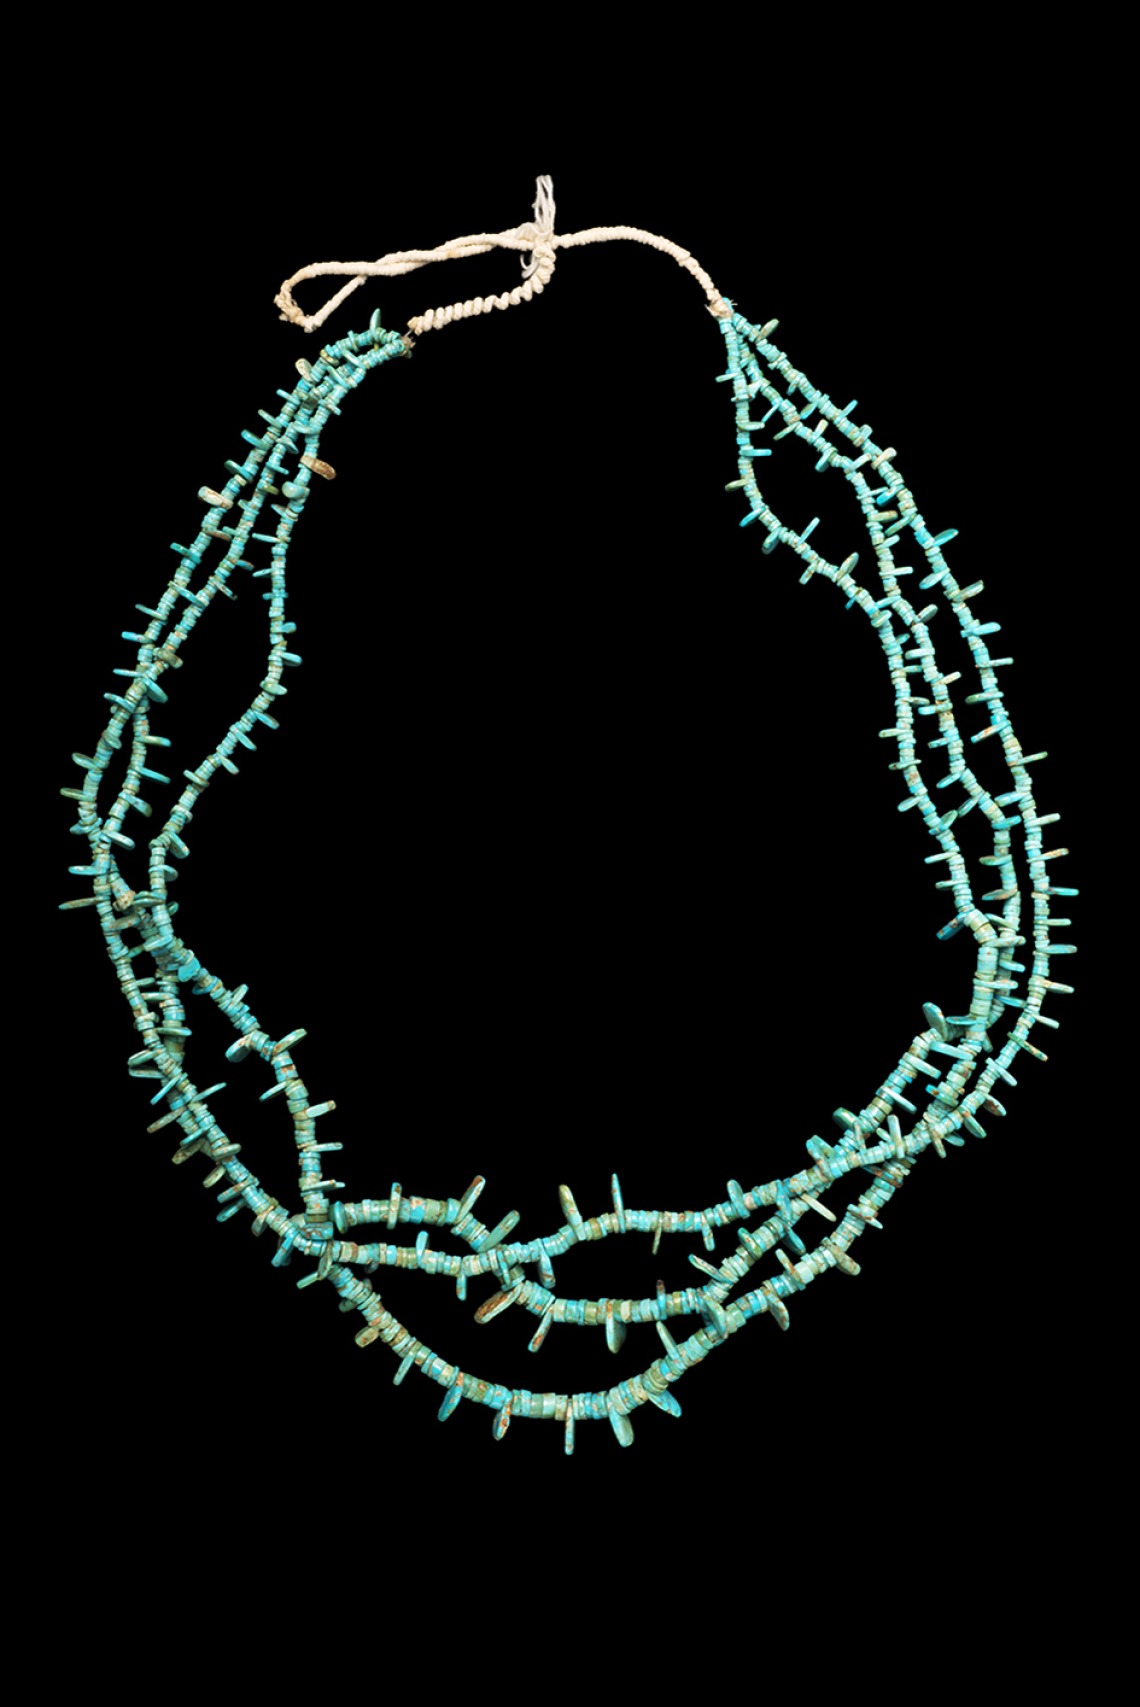 Hypothetical reconstruction of turquoise necklace